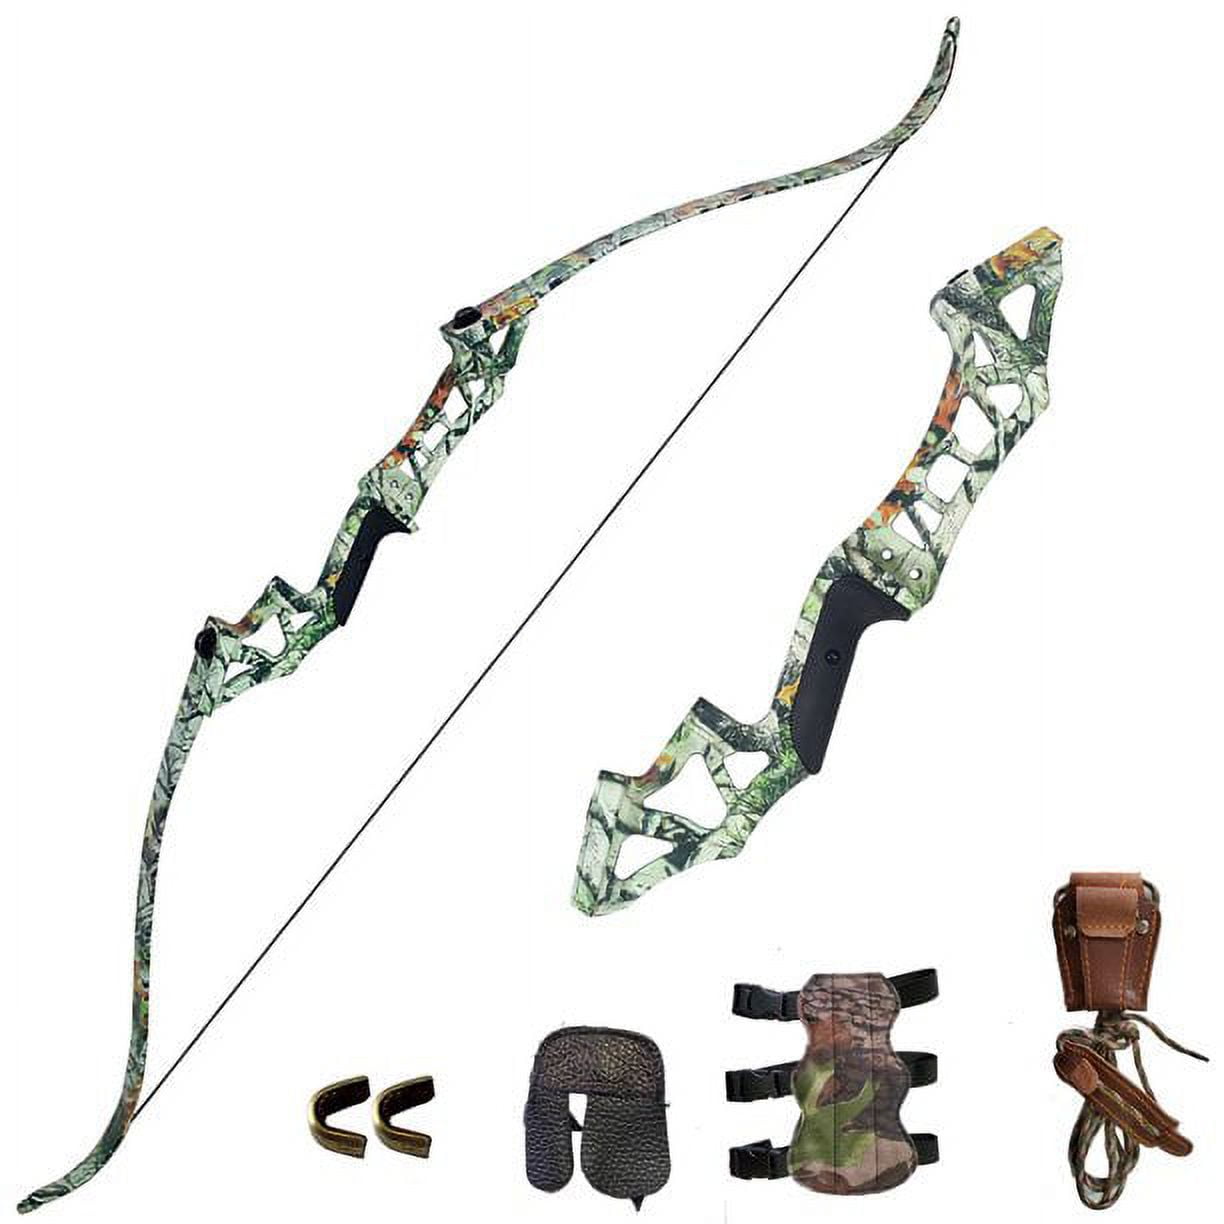 60 60lbs Black Metal Riser Recurve Bow for Outdoor Hunting